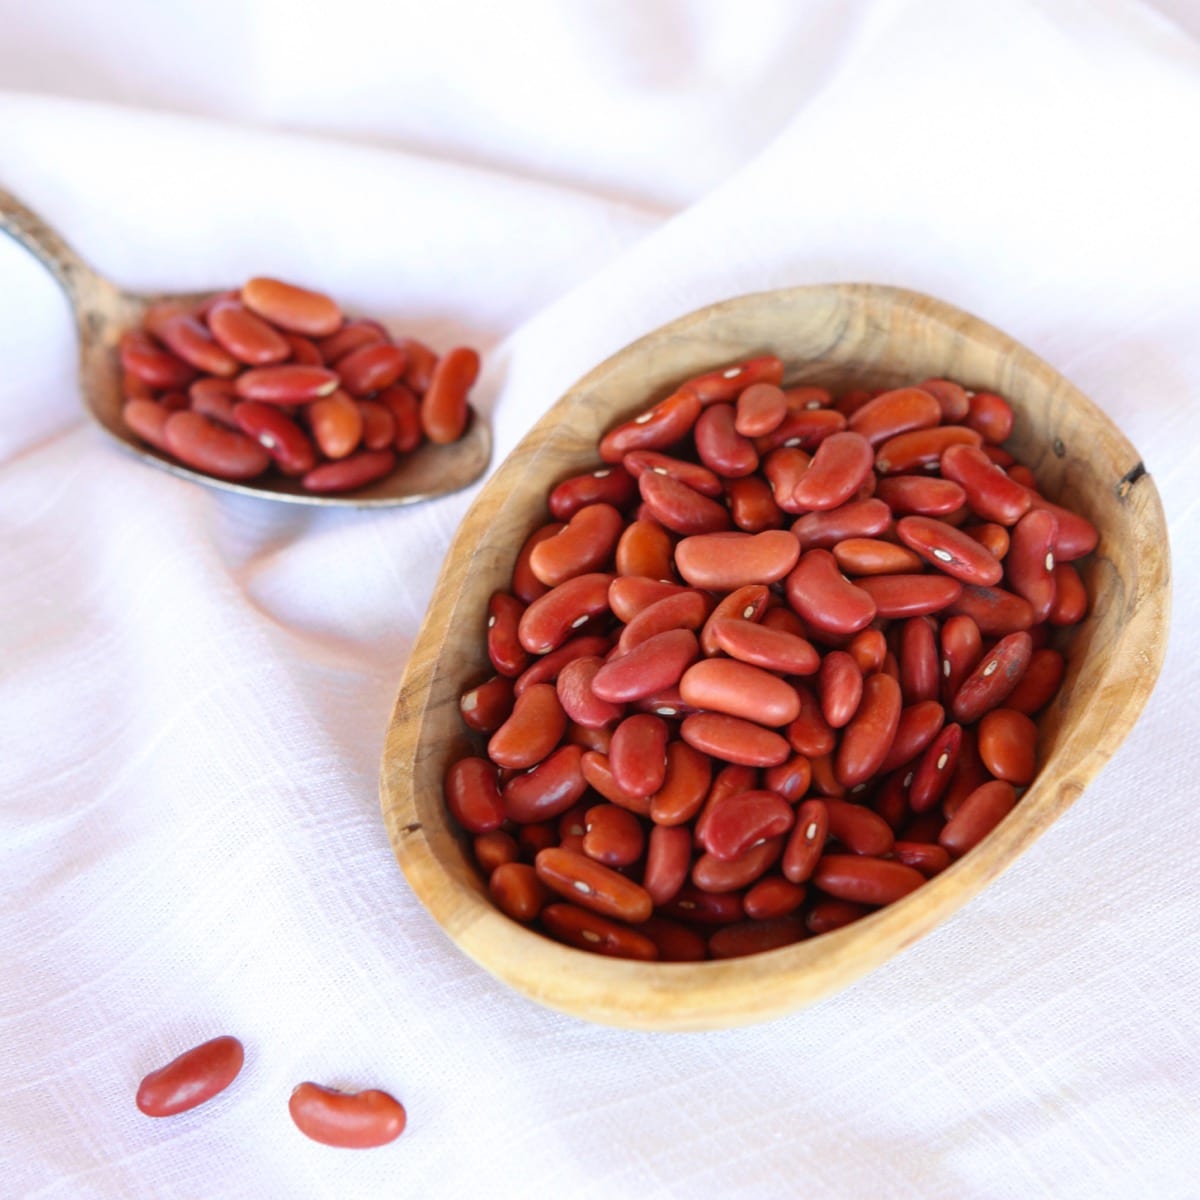 Square Crop - wooden dish of dried Kidney Beans on a white cloth background, spoon of beans in background.